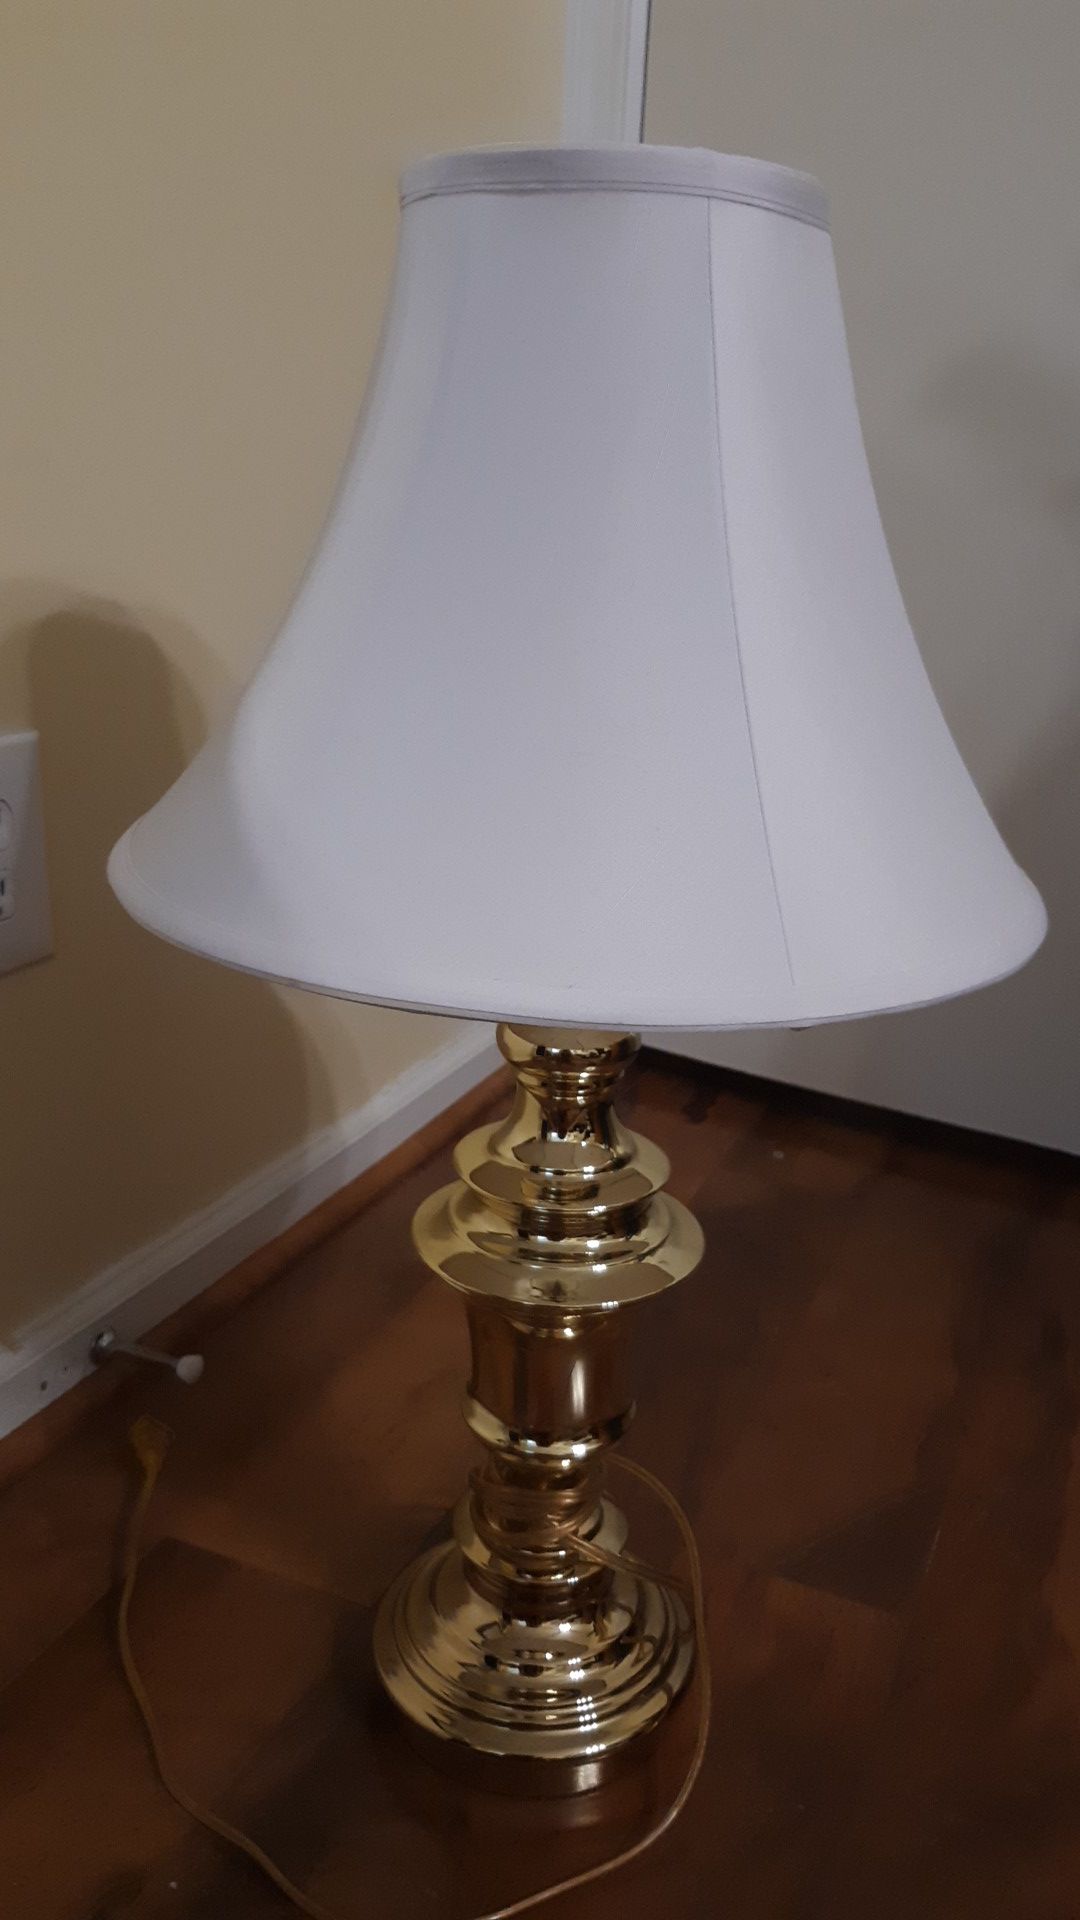 Working gold lamp with white shade